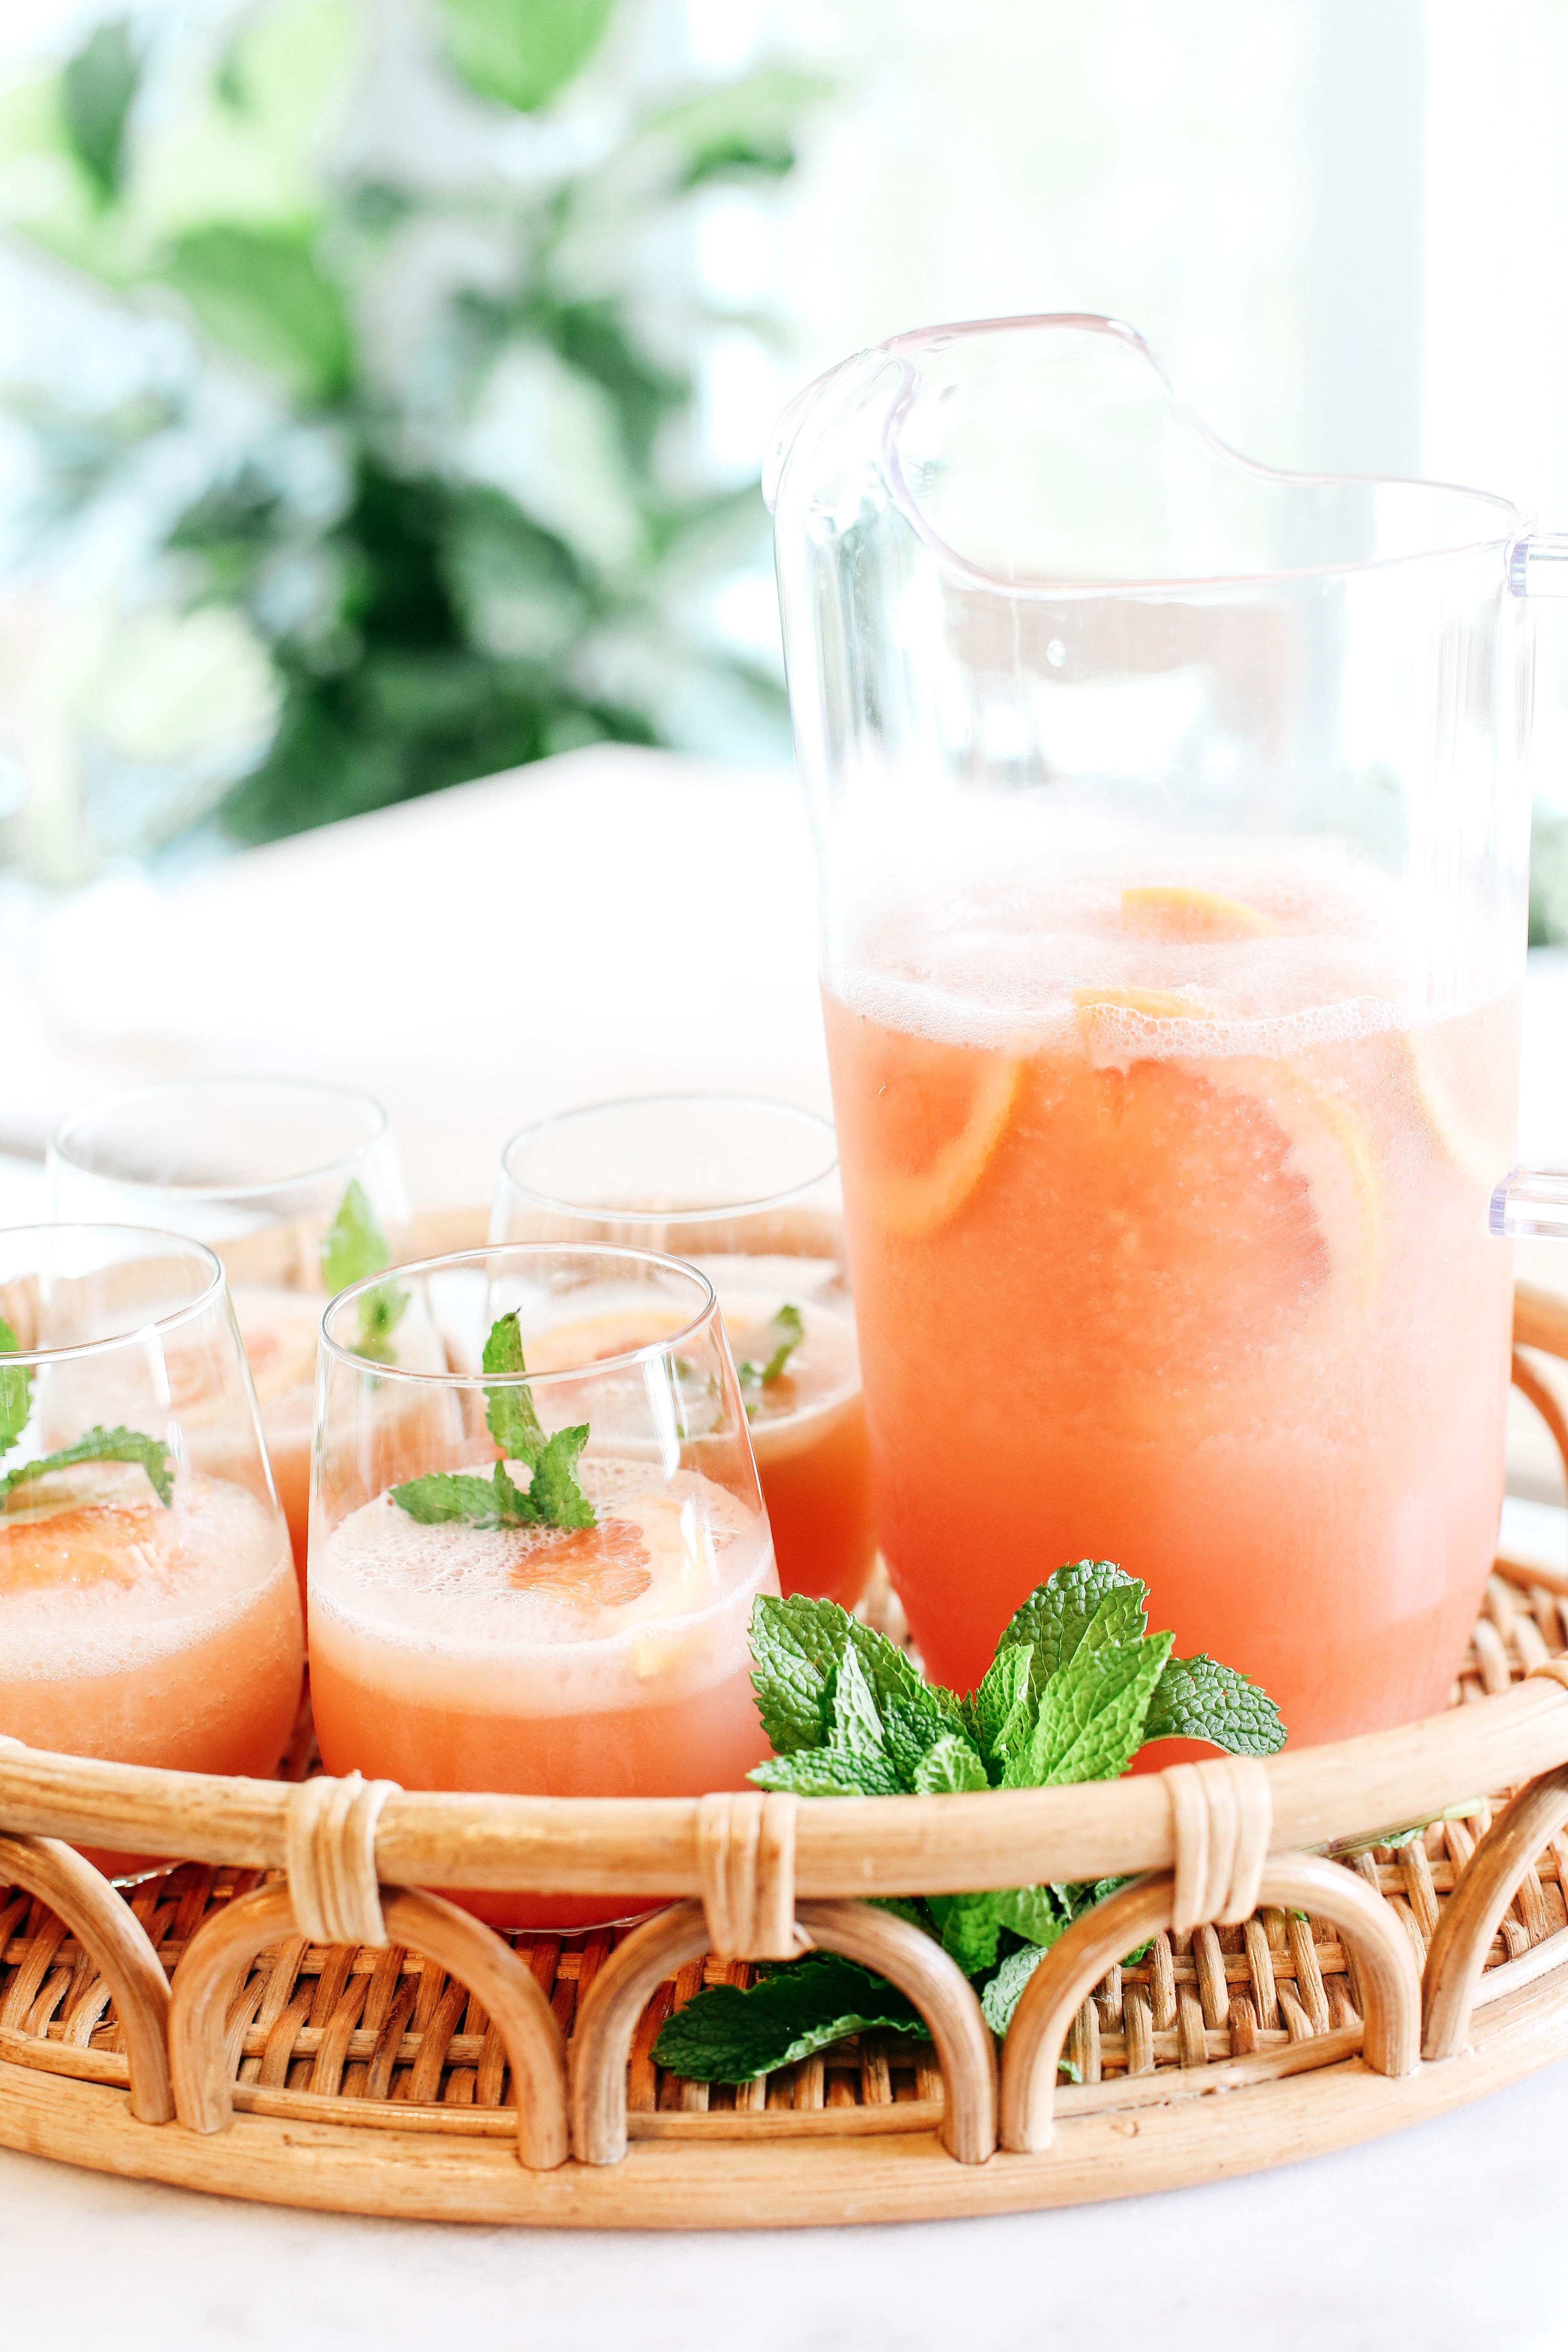 Refreshing Sparkling Grapefruit Frosé that is all natural with zero refined sugar, your favorite bottle of rosé and makes the perfect summer cocktail!